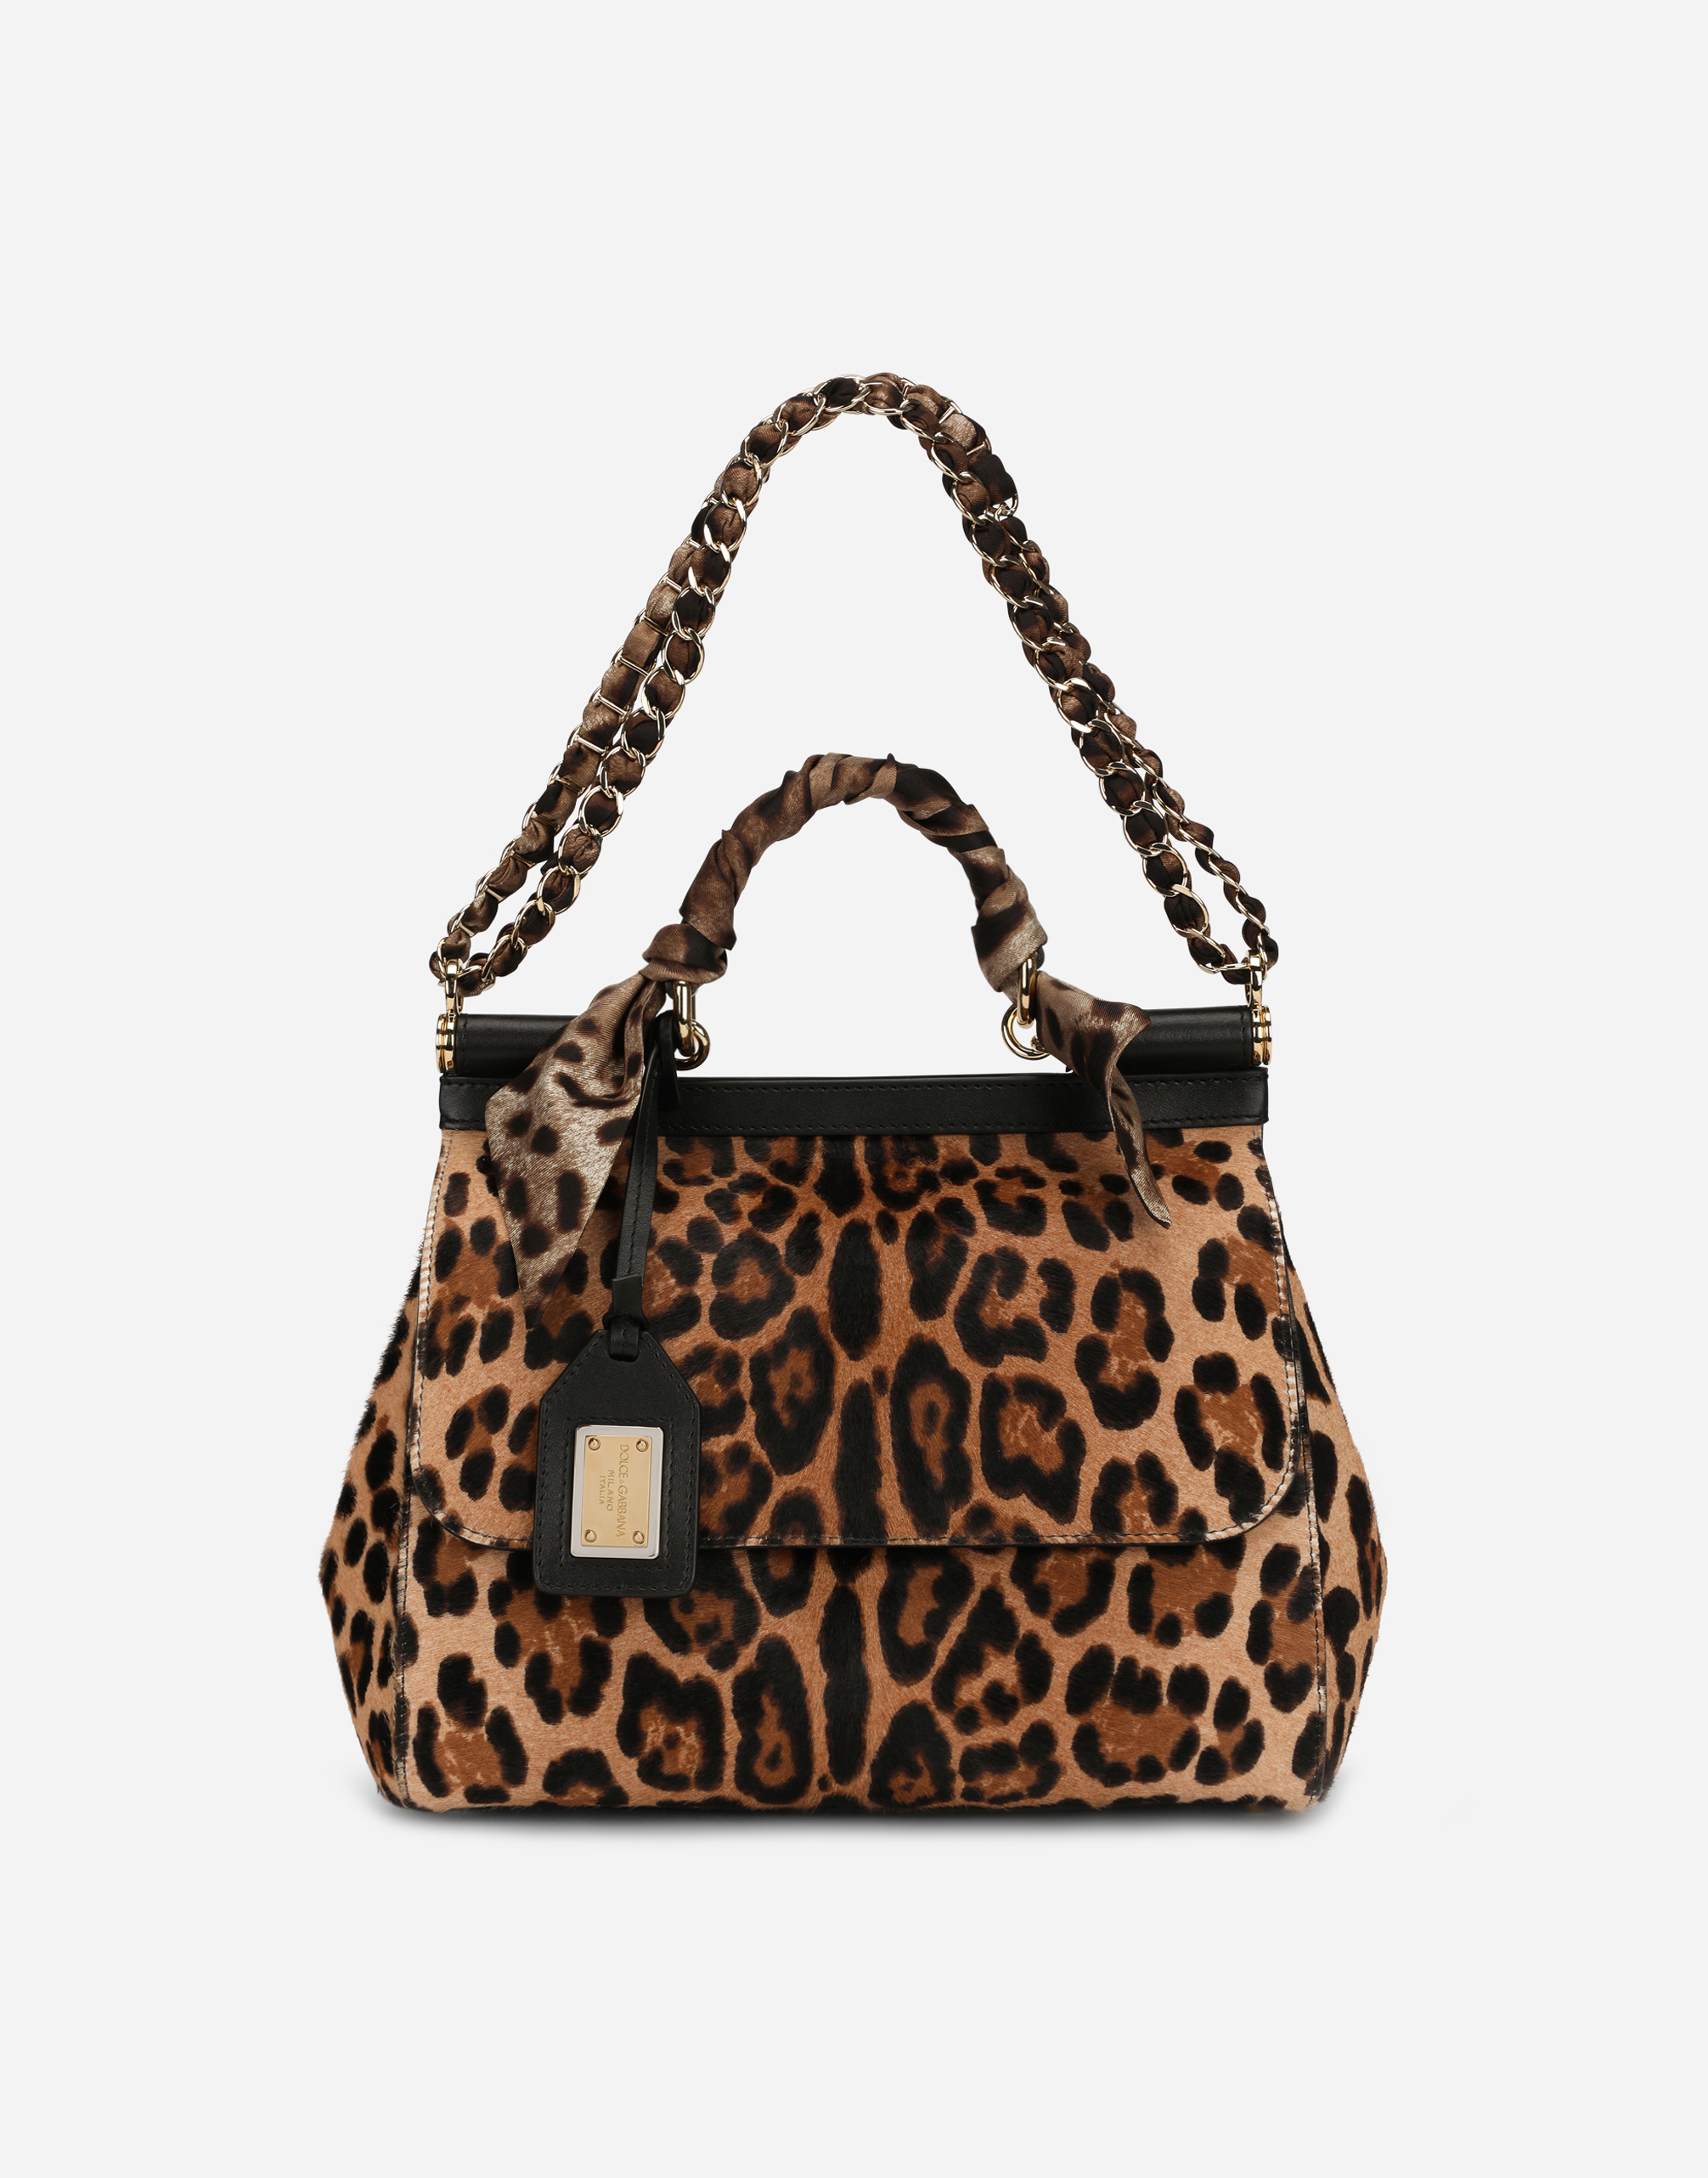 Medium Sicily bag in leopard-print pony hair with scarf detail in Animal Print